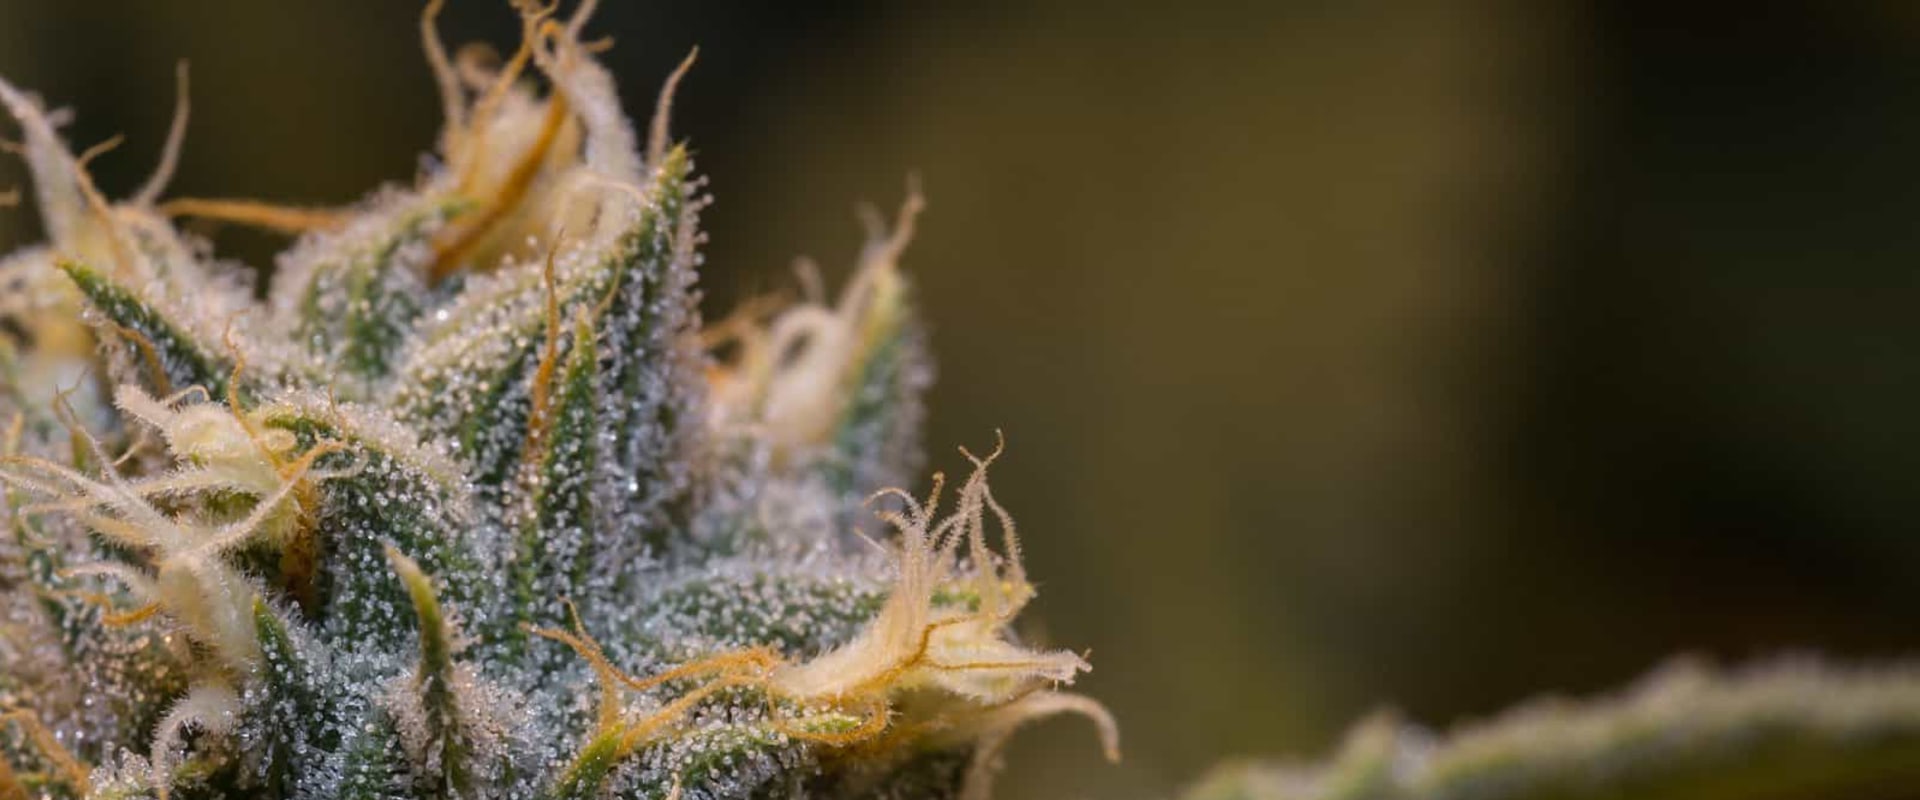 How long does it take for cannabinoid to leave your system?